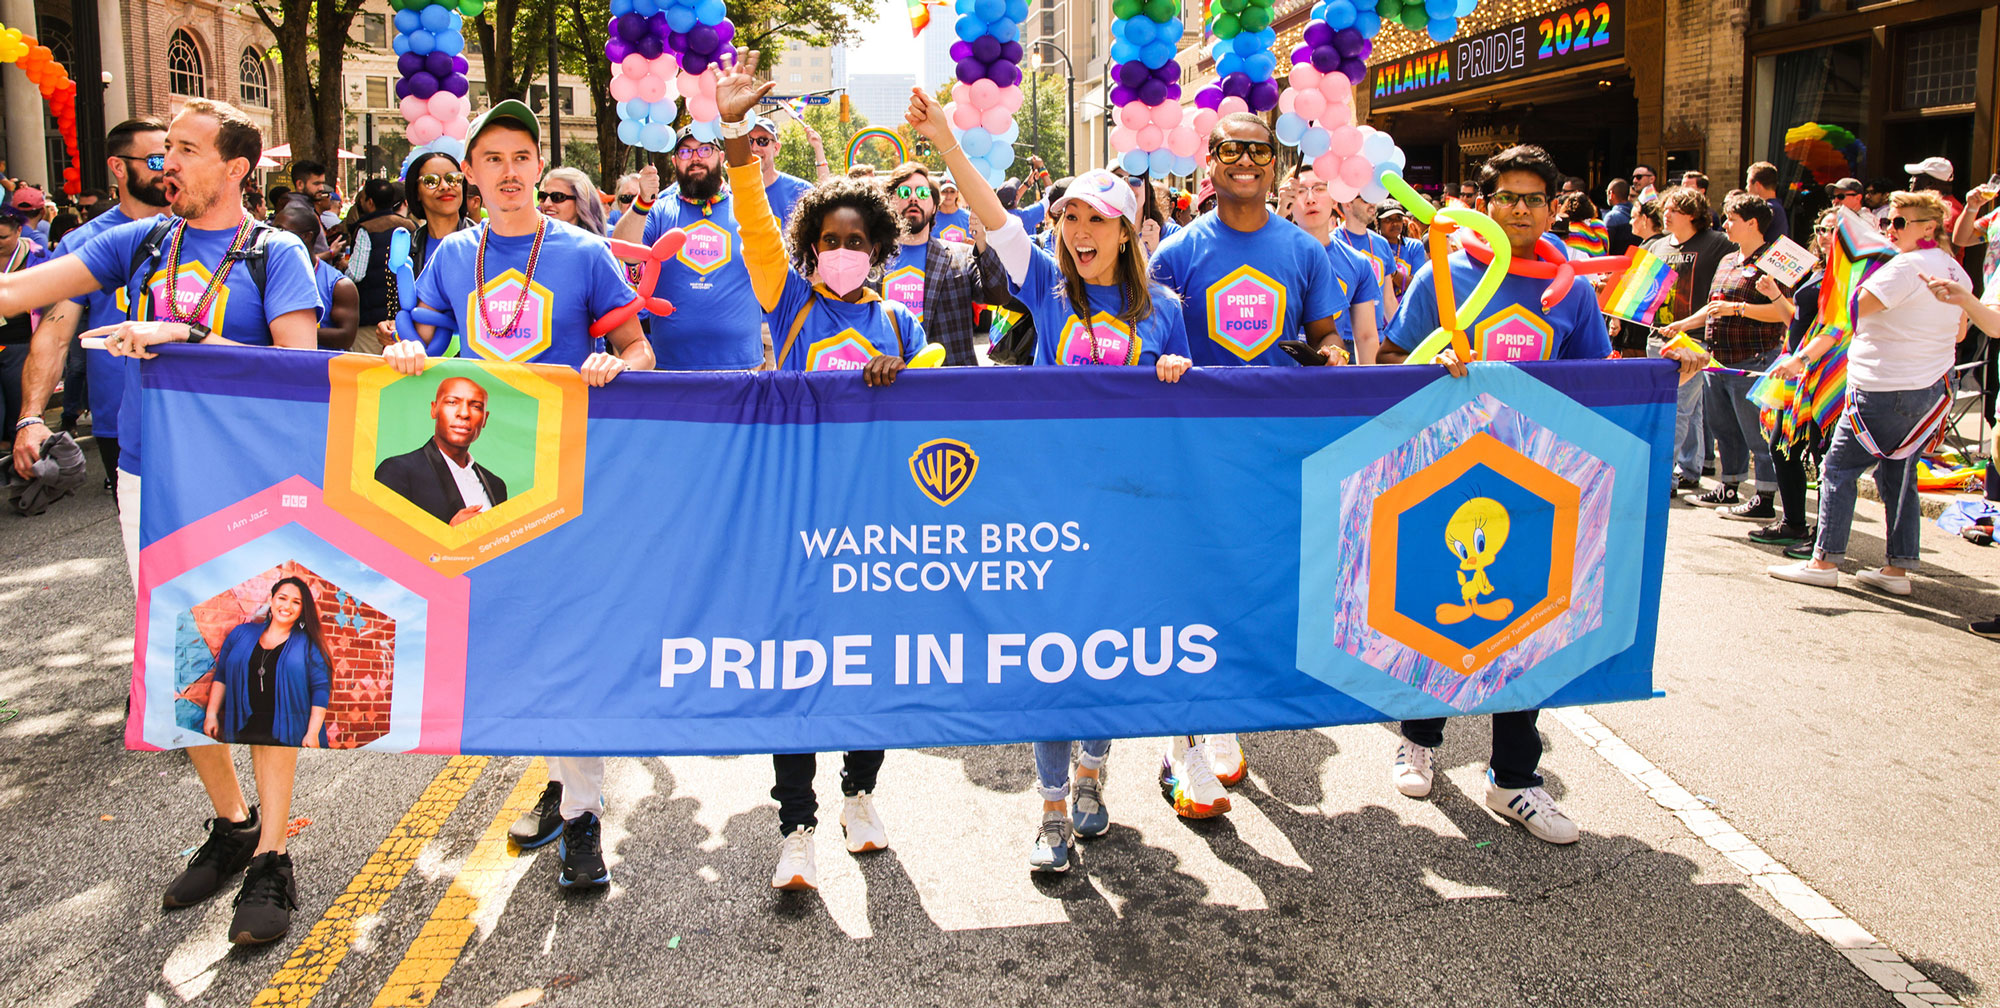 Photo of Warner Bros. Discovery employees carrying a banner reading "Pride in Focus" at the 2022 Atlanta Pride Parade